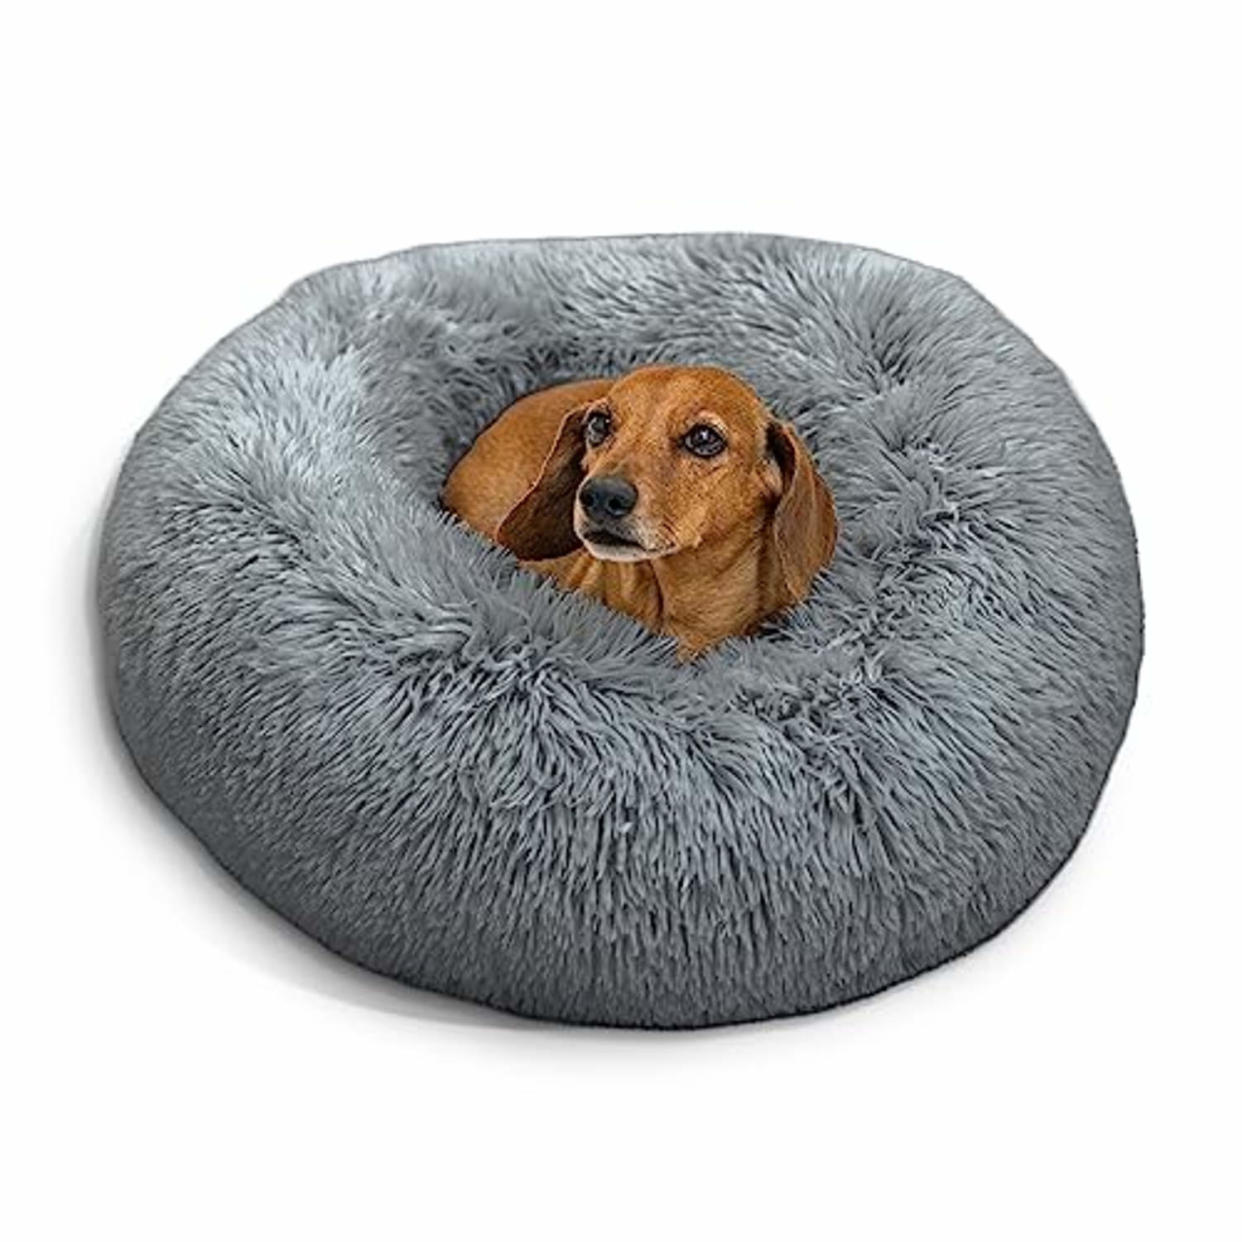 Best Friends by Sheri The Original Calming Donut Cat and Dog Bed in Shag Fur Gray, Small 23x23 (AMAZON)